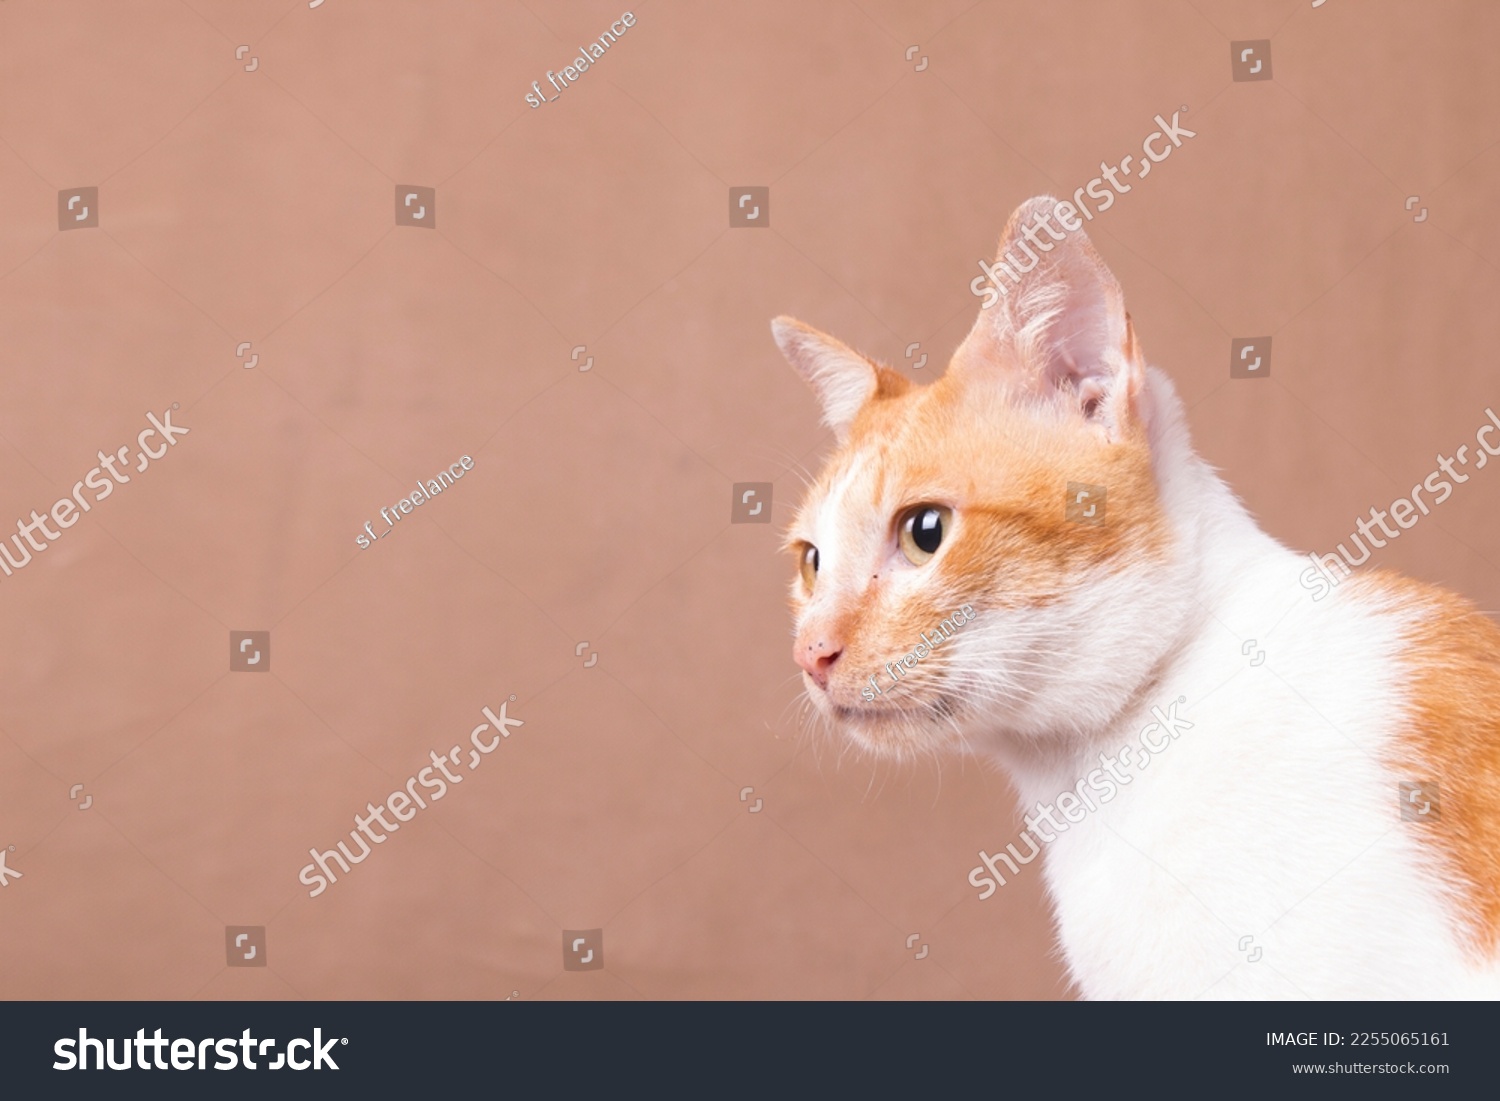 closeup of orange cat posing side view with sharp eyes, negative space. #2255065161